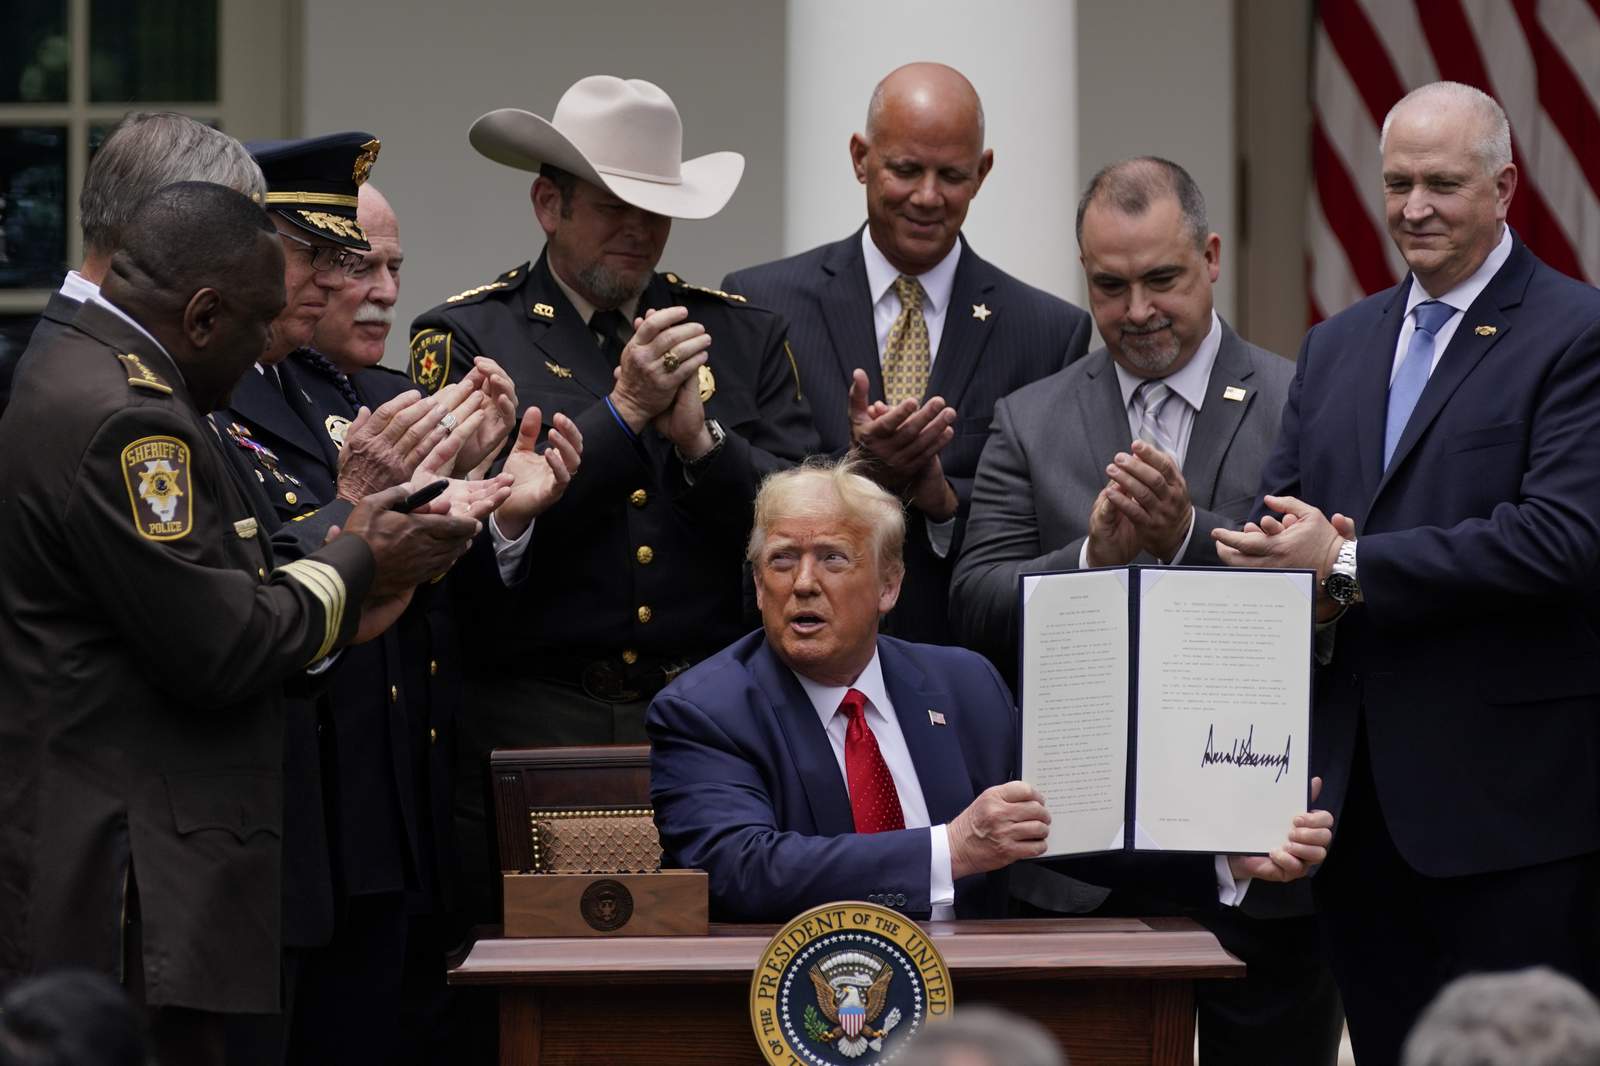 Trump signs order on police reform, doesn't mention racism